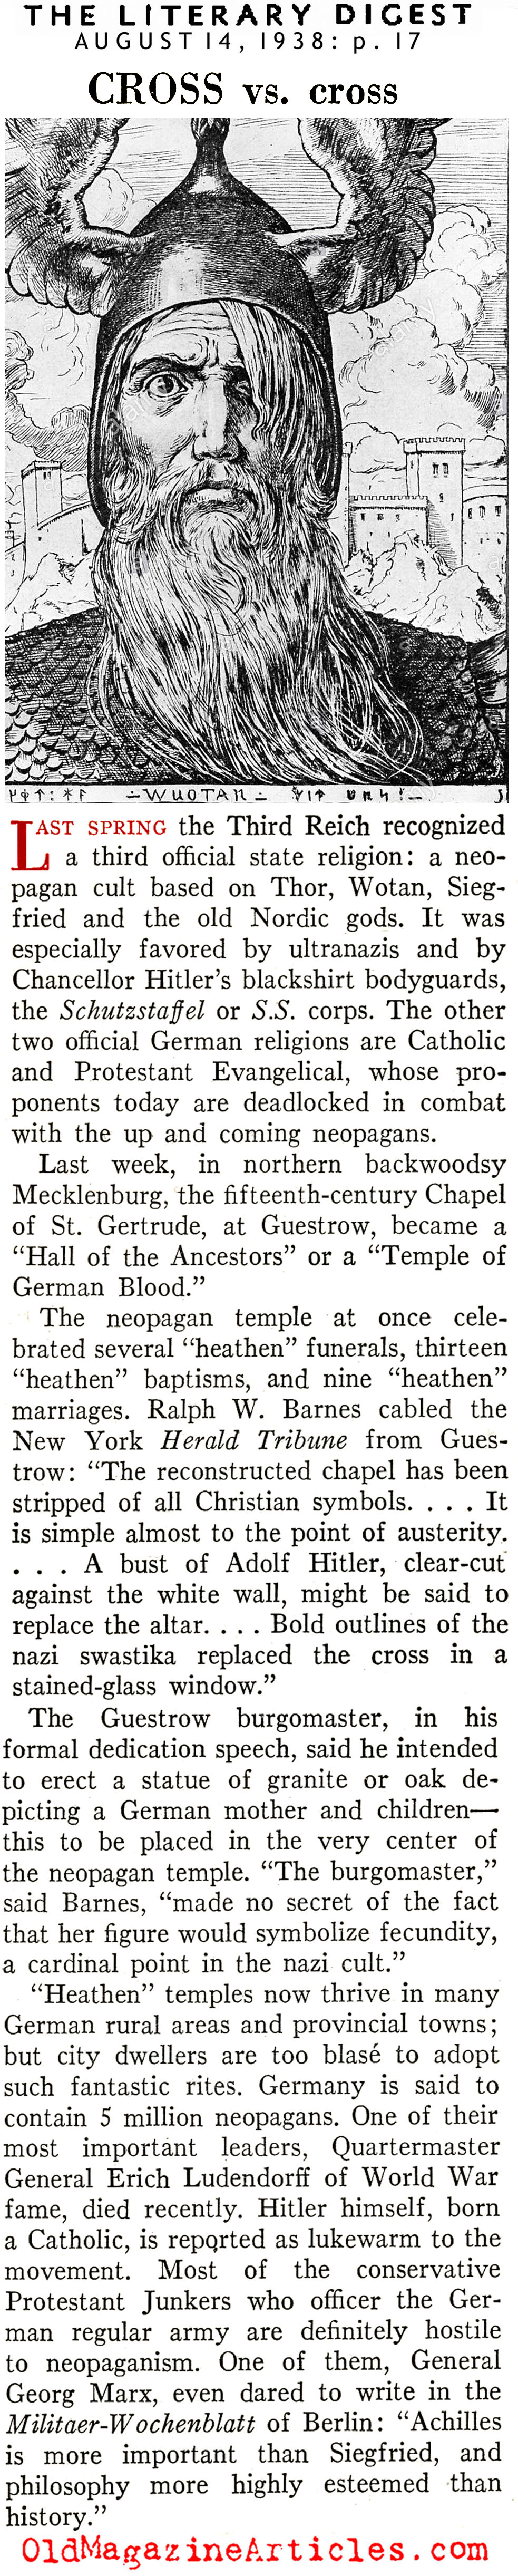 Their Freaky Religion (Literary Digest, 1938)